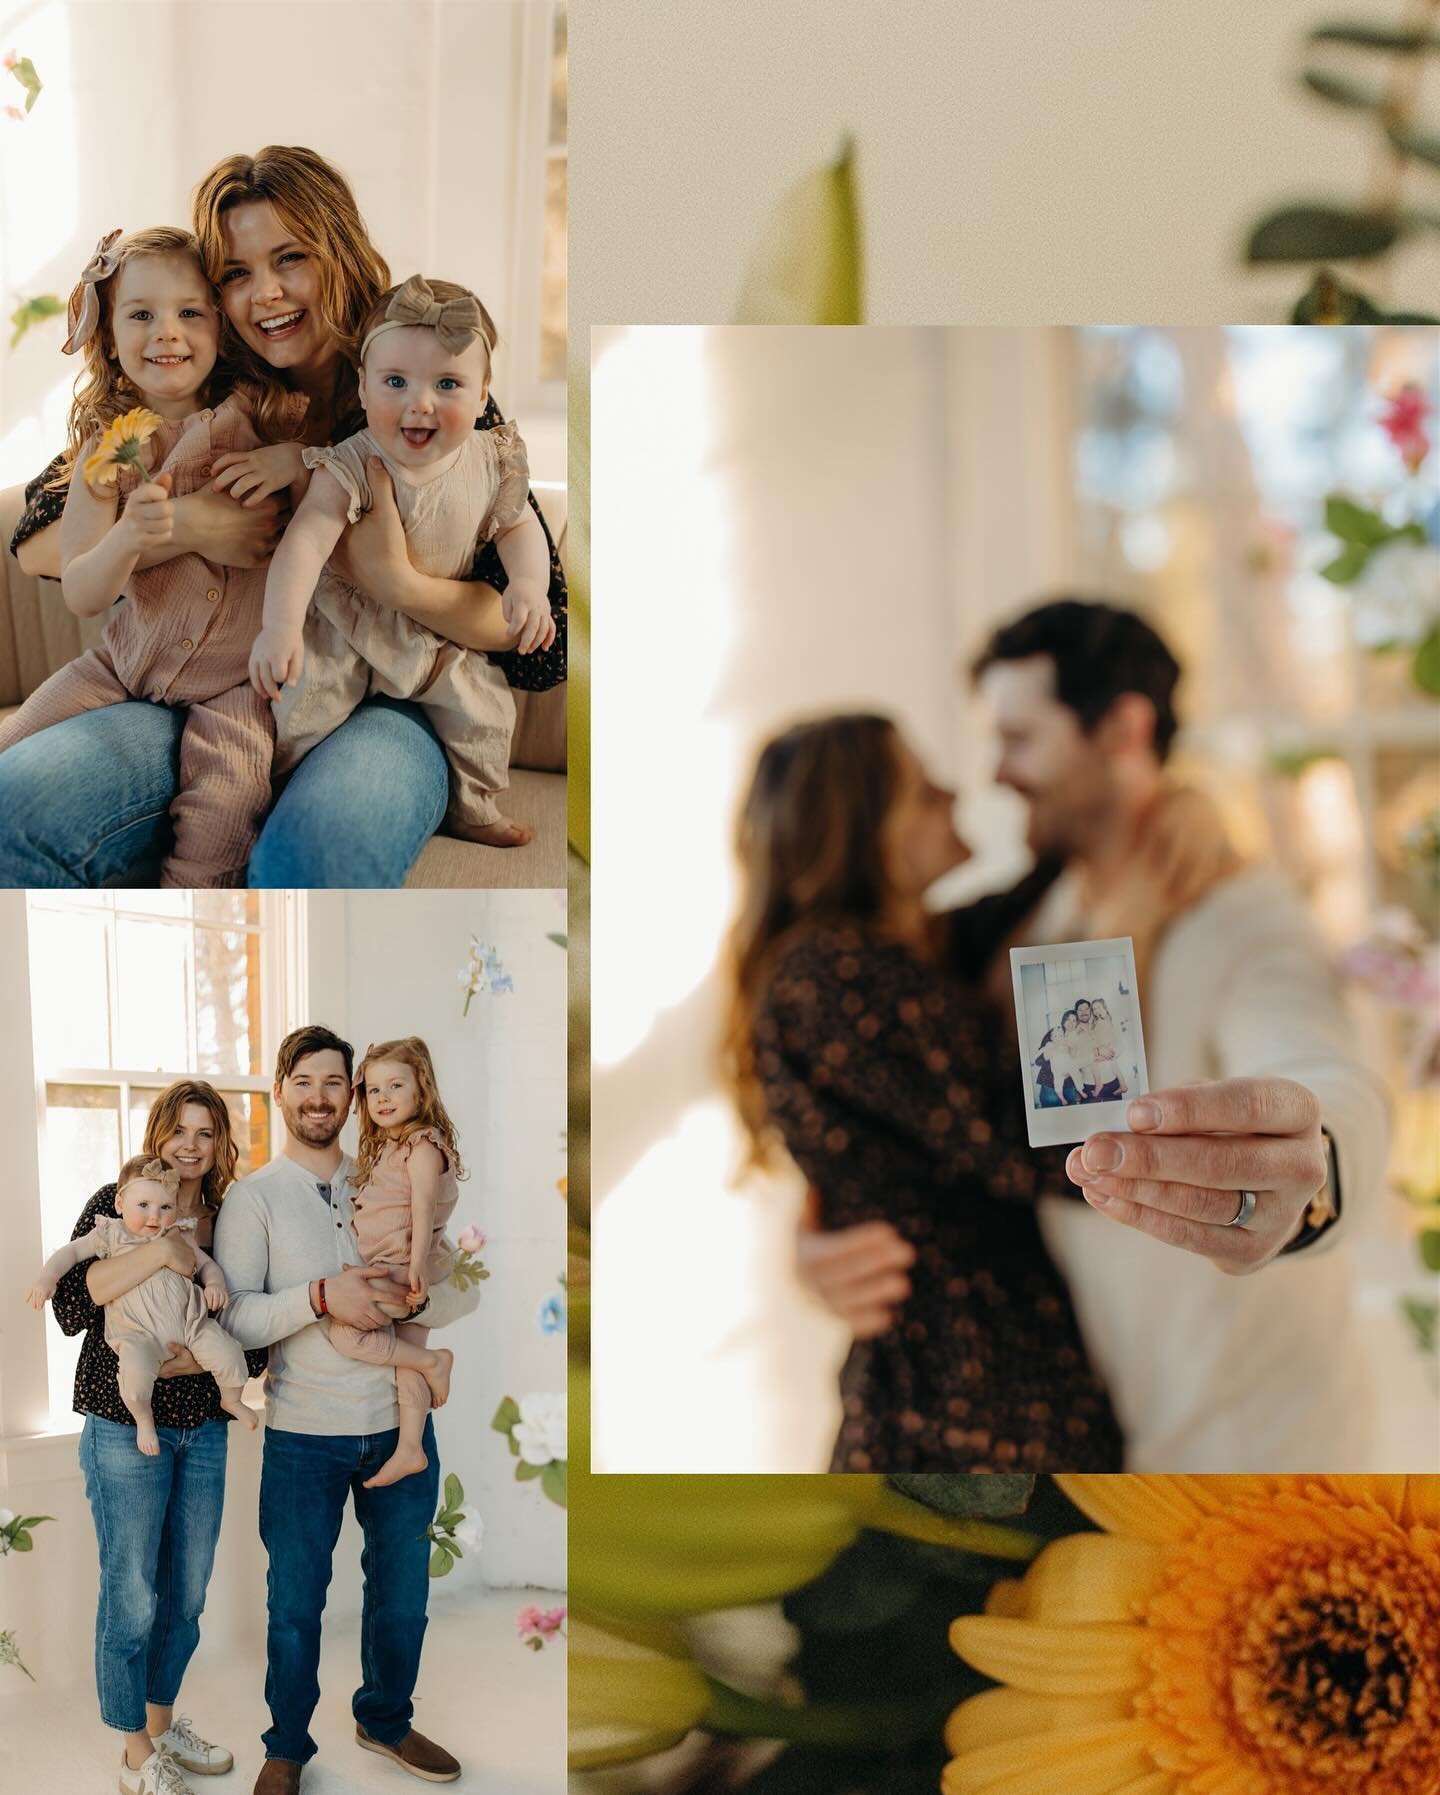 In the bloom of family love, the Zeller&rsquo;s growing beauty shines brightly amidst the blossoming flowers. Capturing these precious moments is a true honor 🌼

Book your lifestyle family sessions now ! My books are filling up and I will be on mate